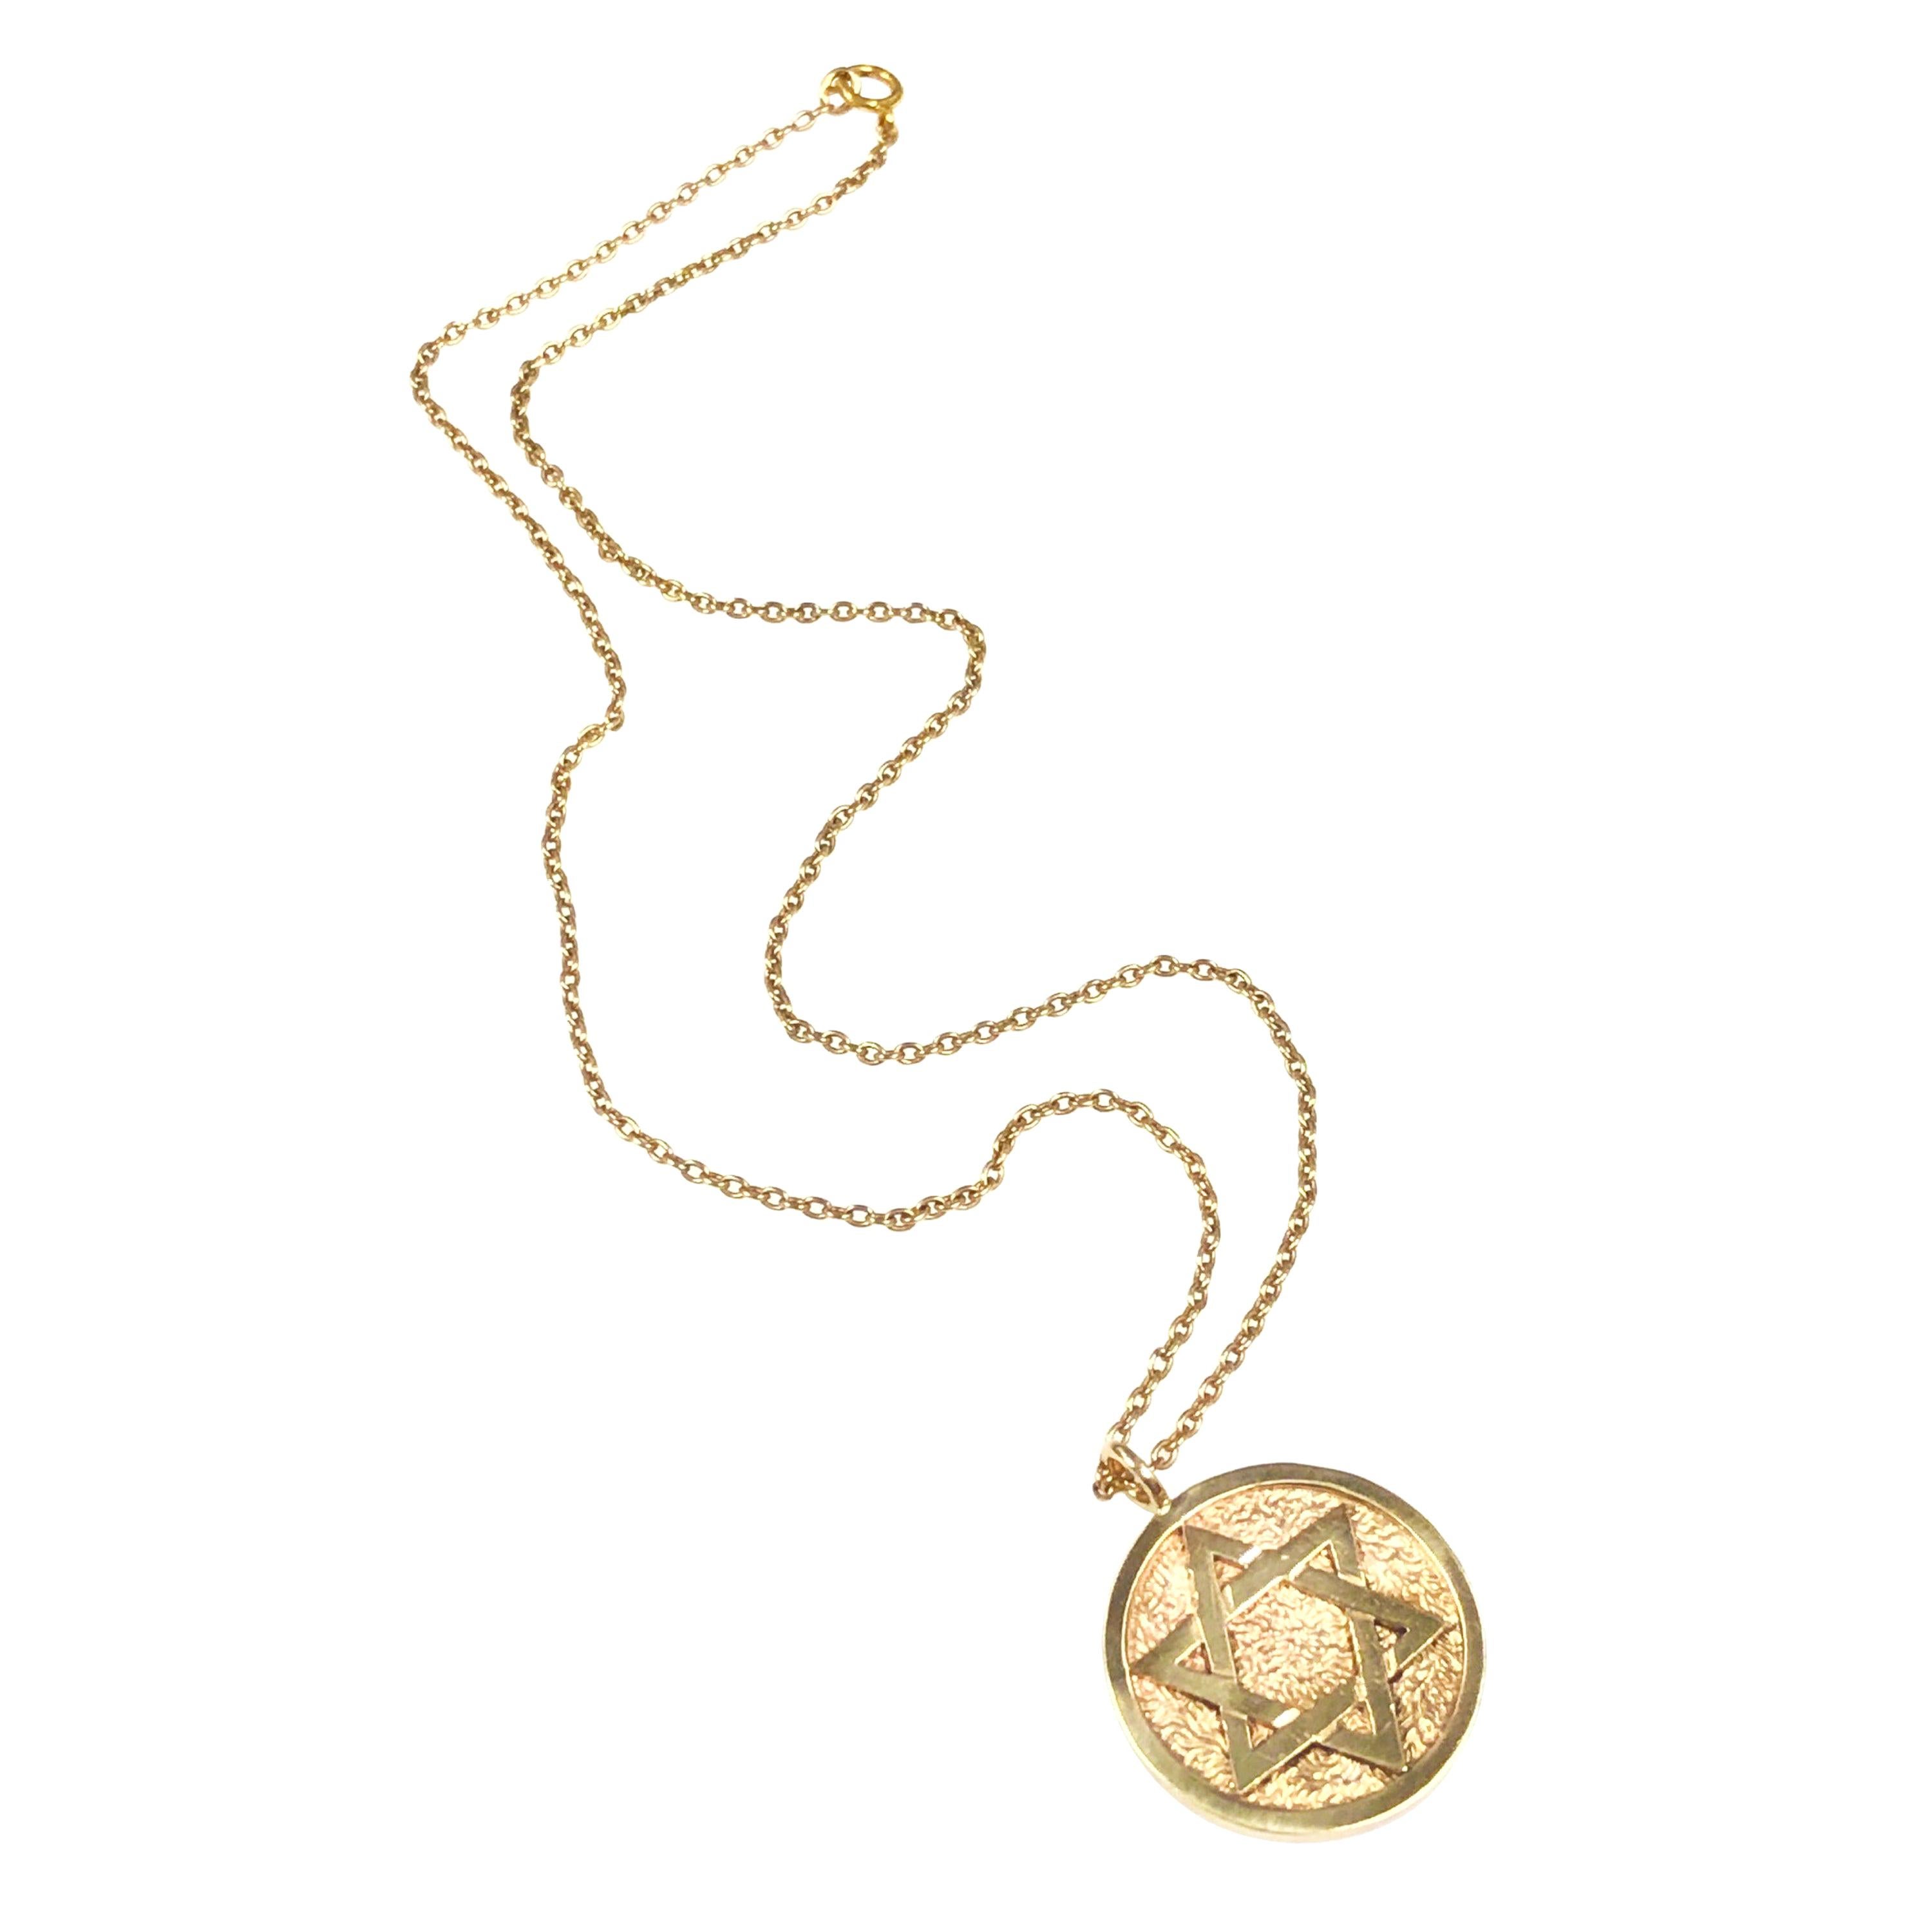 Gold Star of David Pendant Gift from Sammy Davis Jr. and Worn by Jerry Lewis